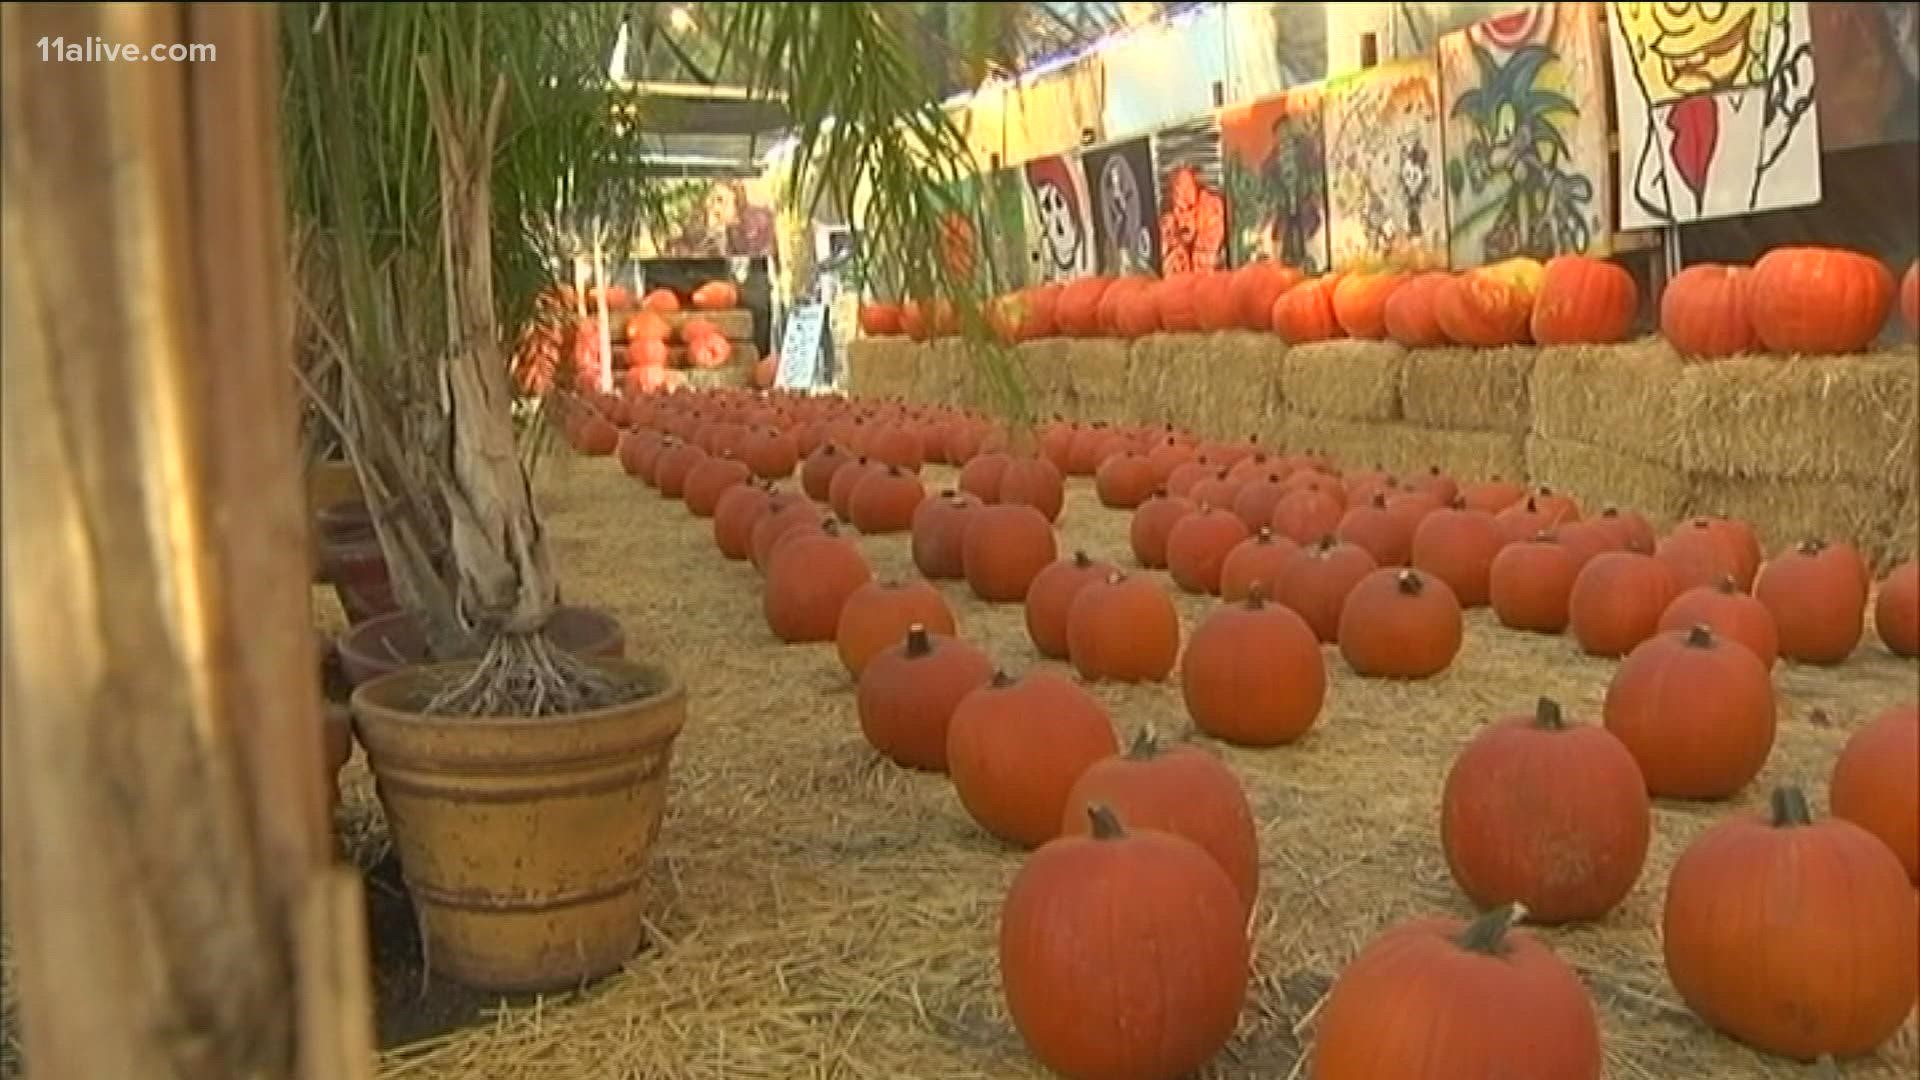 A pumpkin shortage is haunting Americans across the country as we get ready to celebrate spooky season.